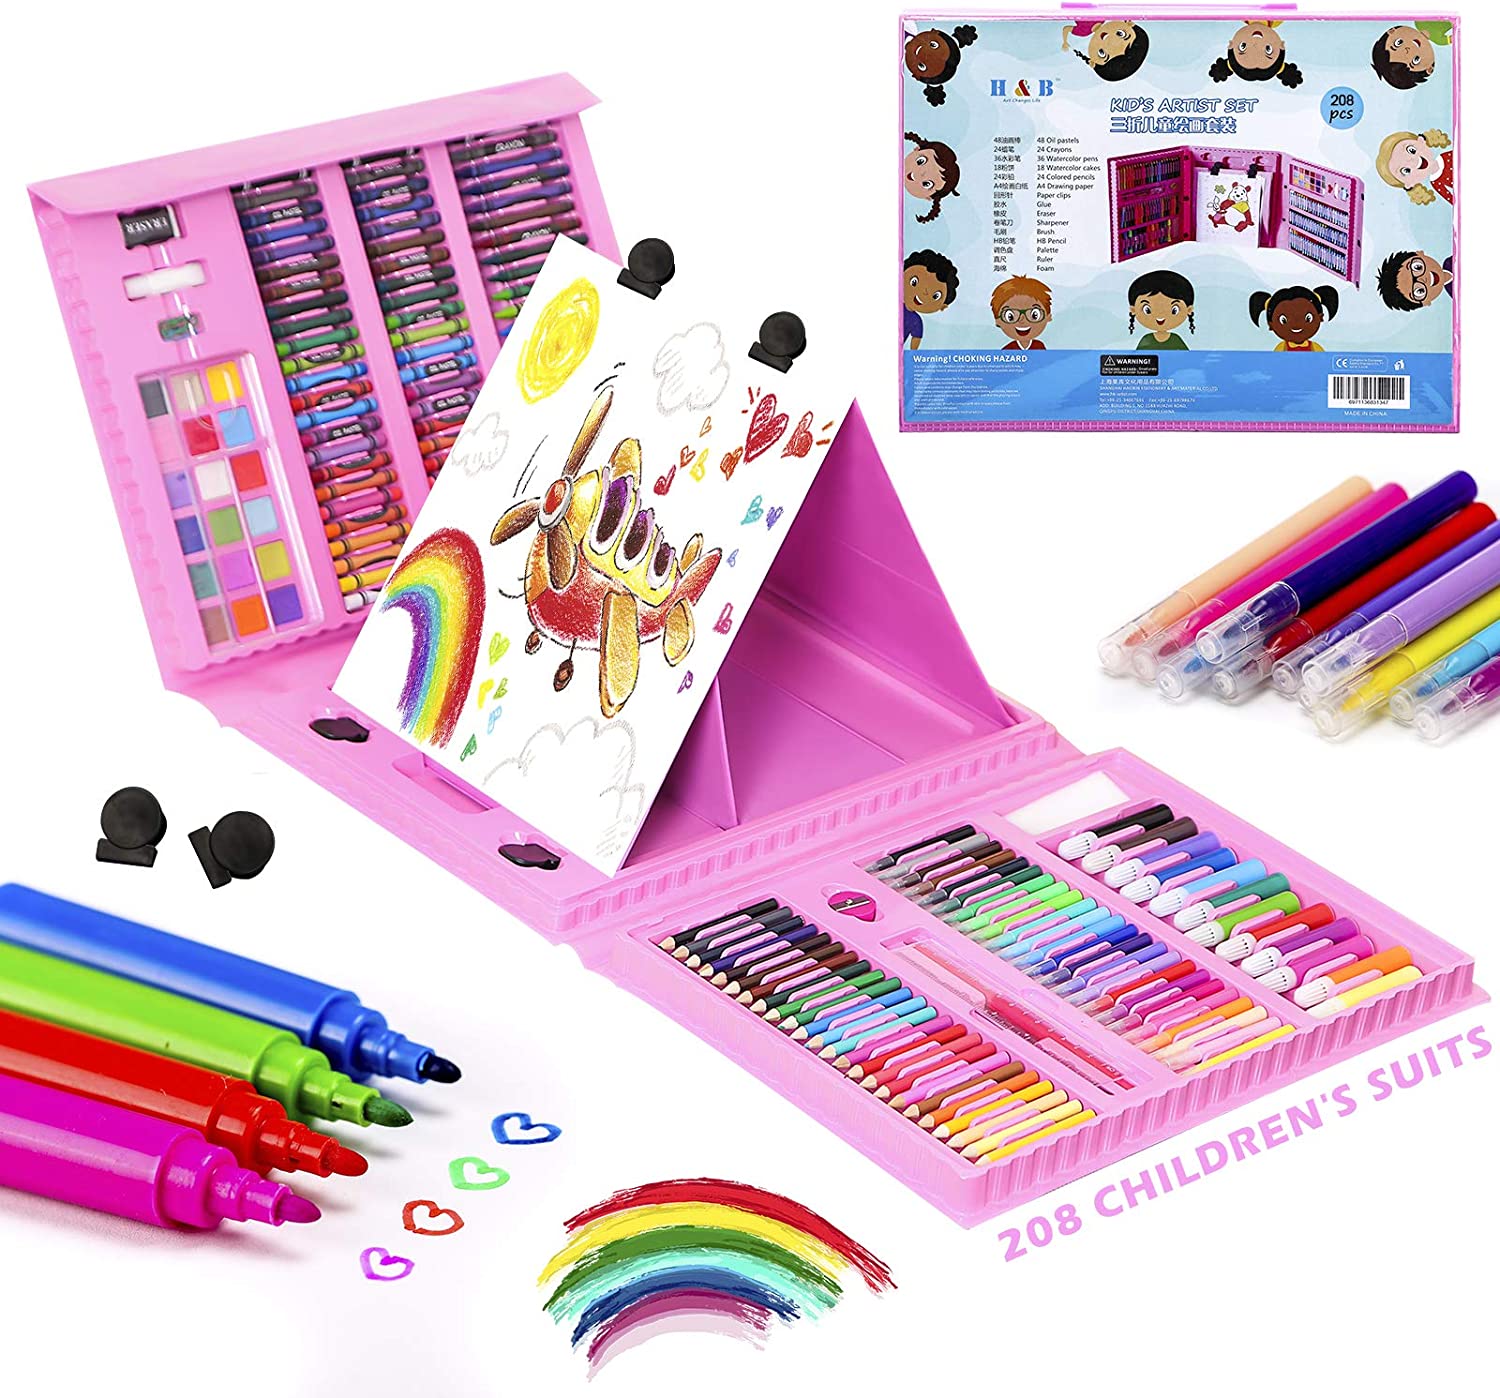 iBayam Art Kit Art Supplies Drawing Kits Arts and Crafts for Kids Gifts for  T